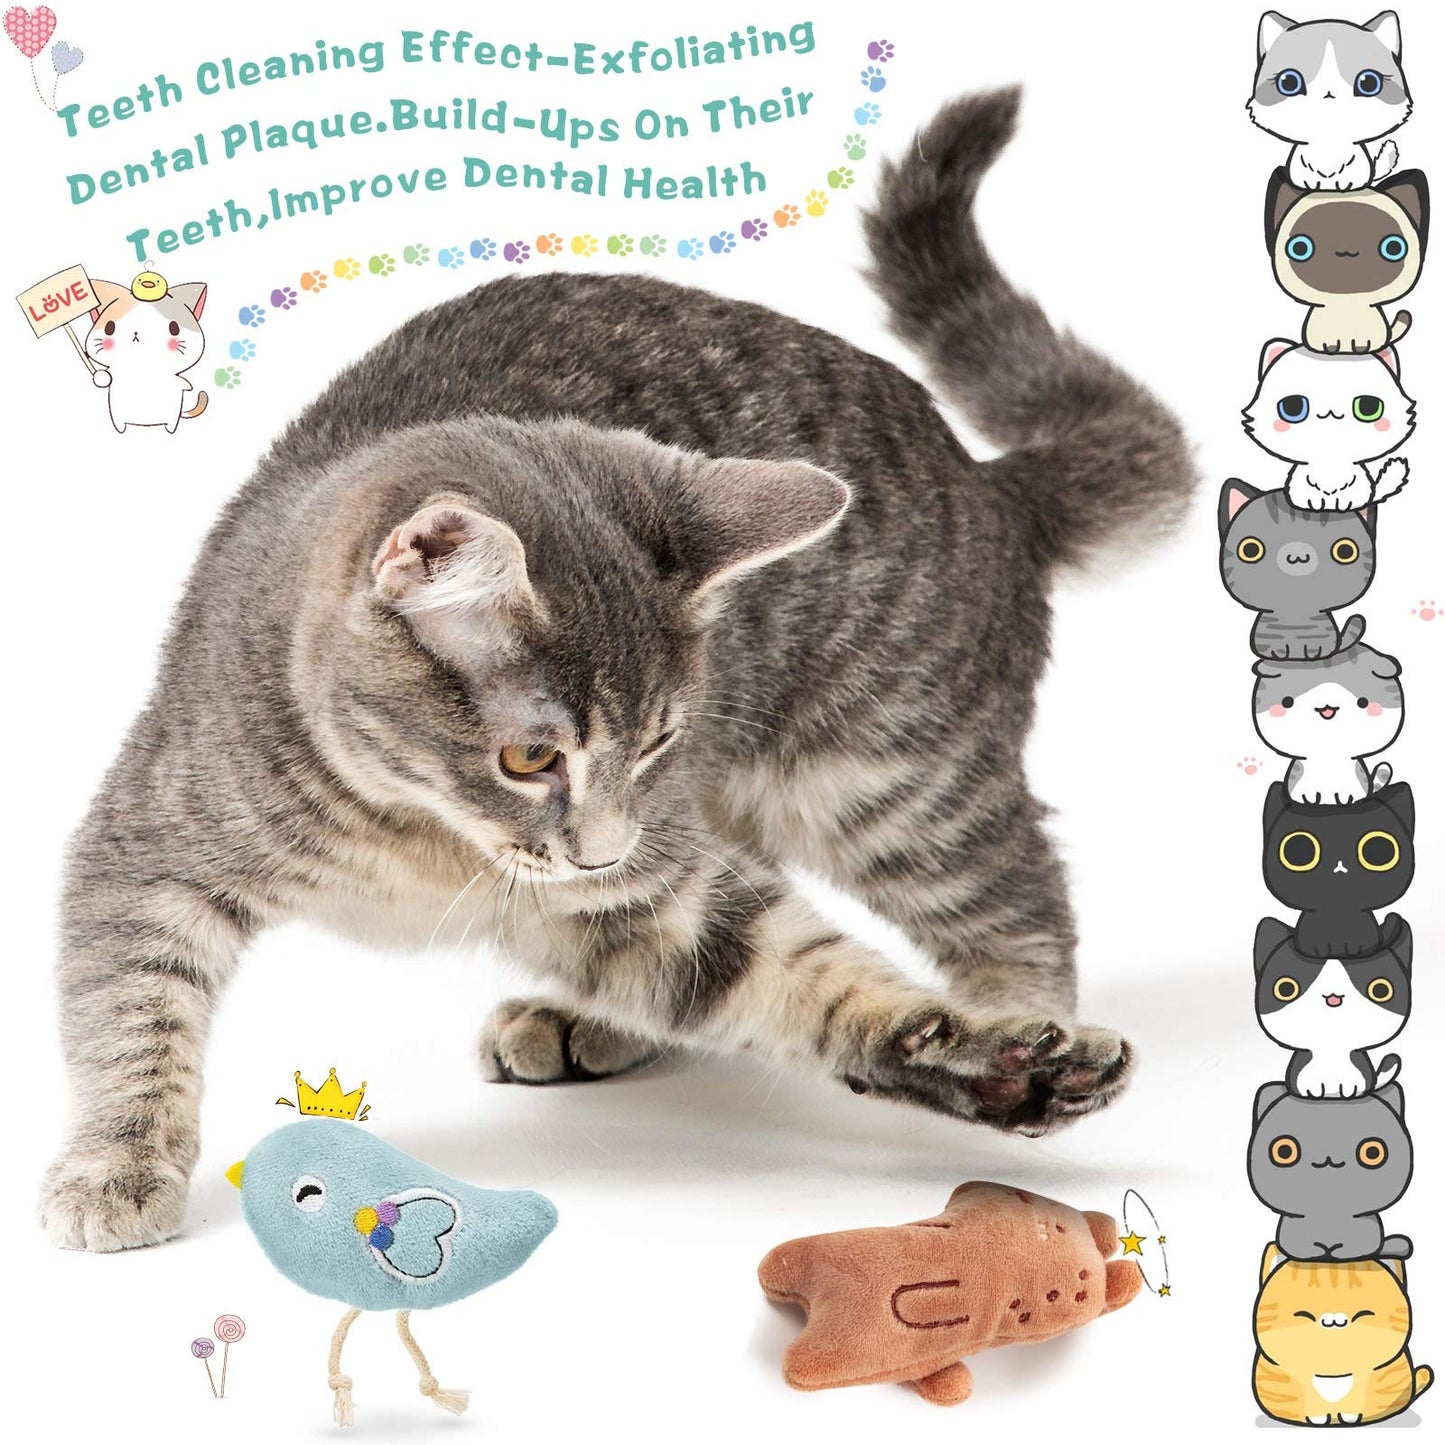 Teeth Cleaning Toy For Cats and Kittens. Pet products. With mint